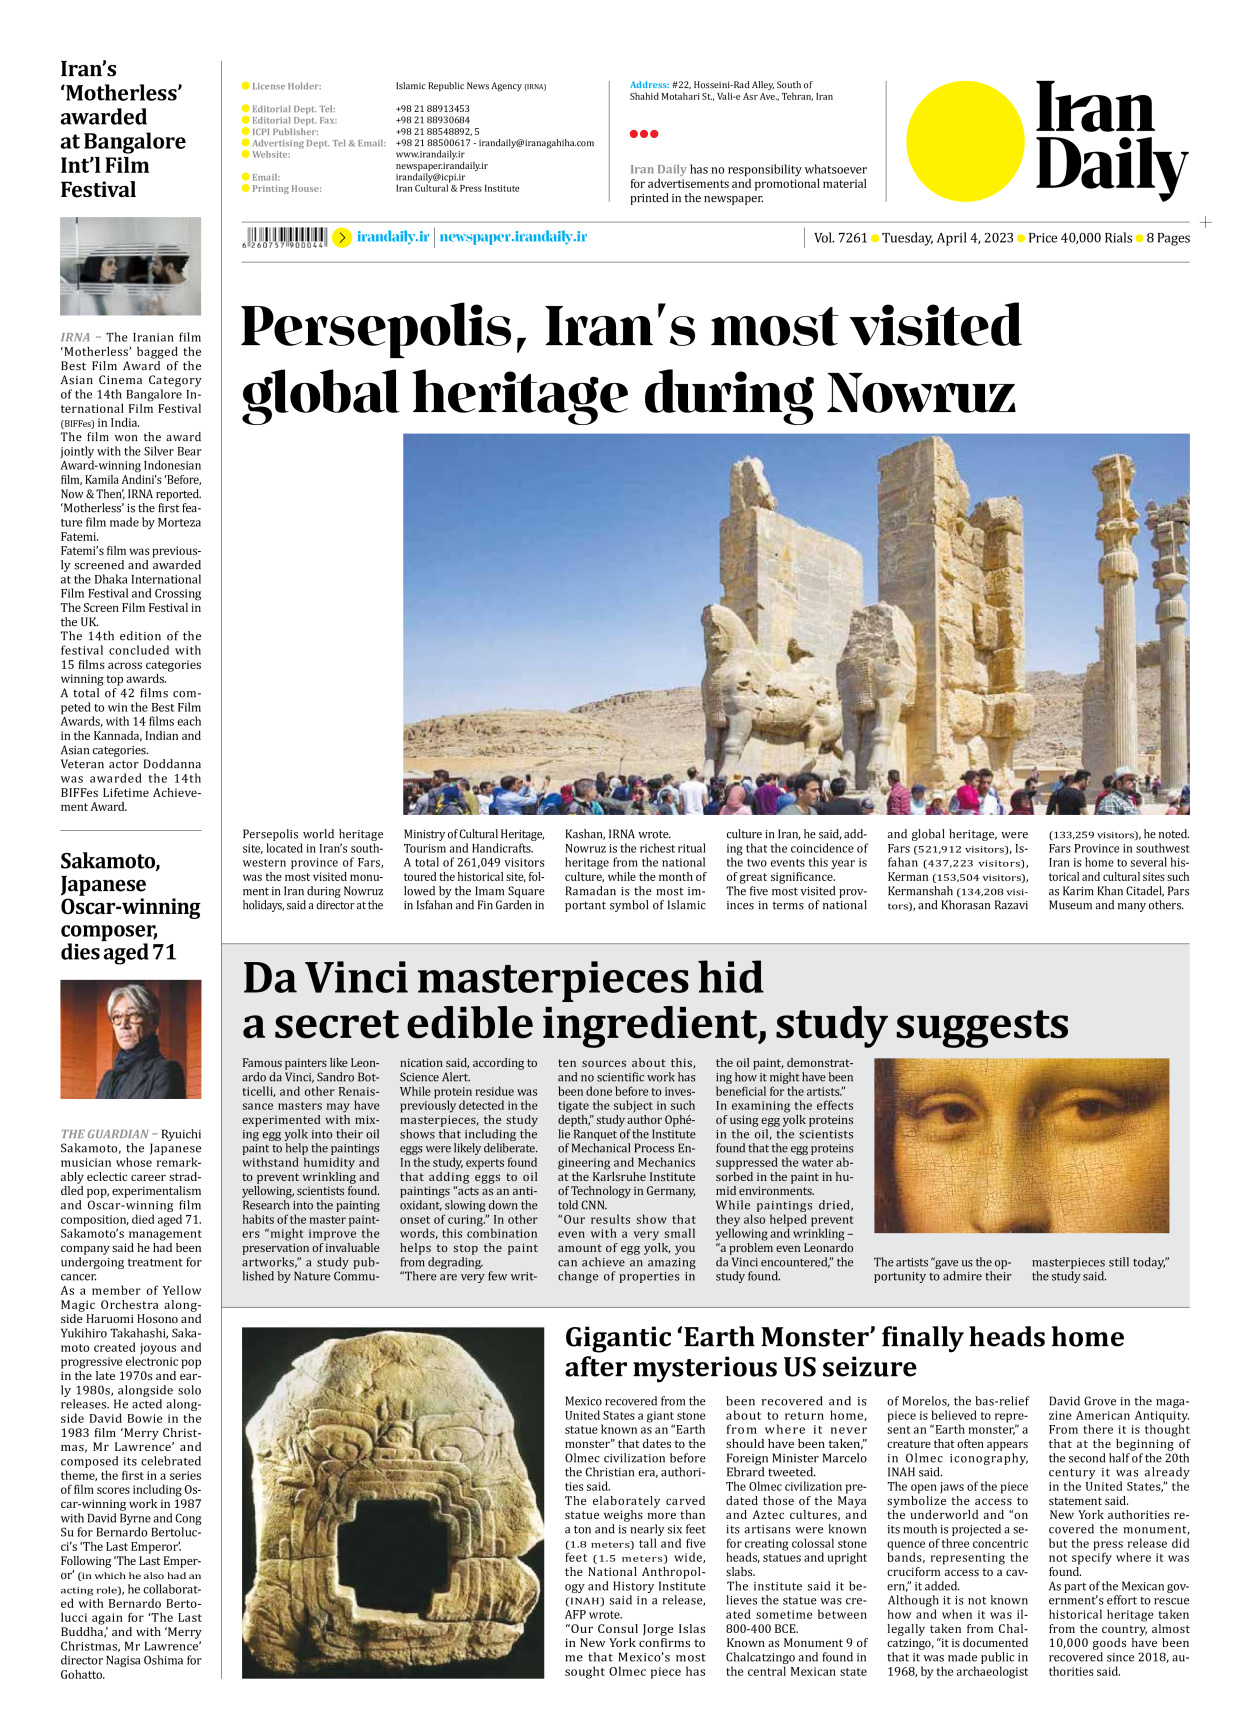 Iran Daily - Number Seven Thousand Two Hundred and Sixty One - 04 April 2023 - Page 8